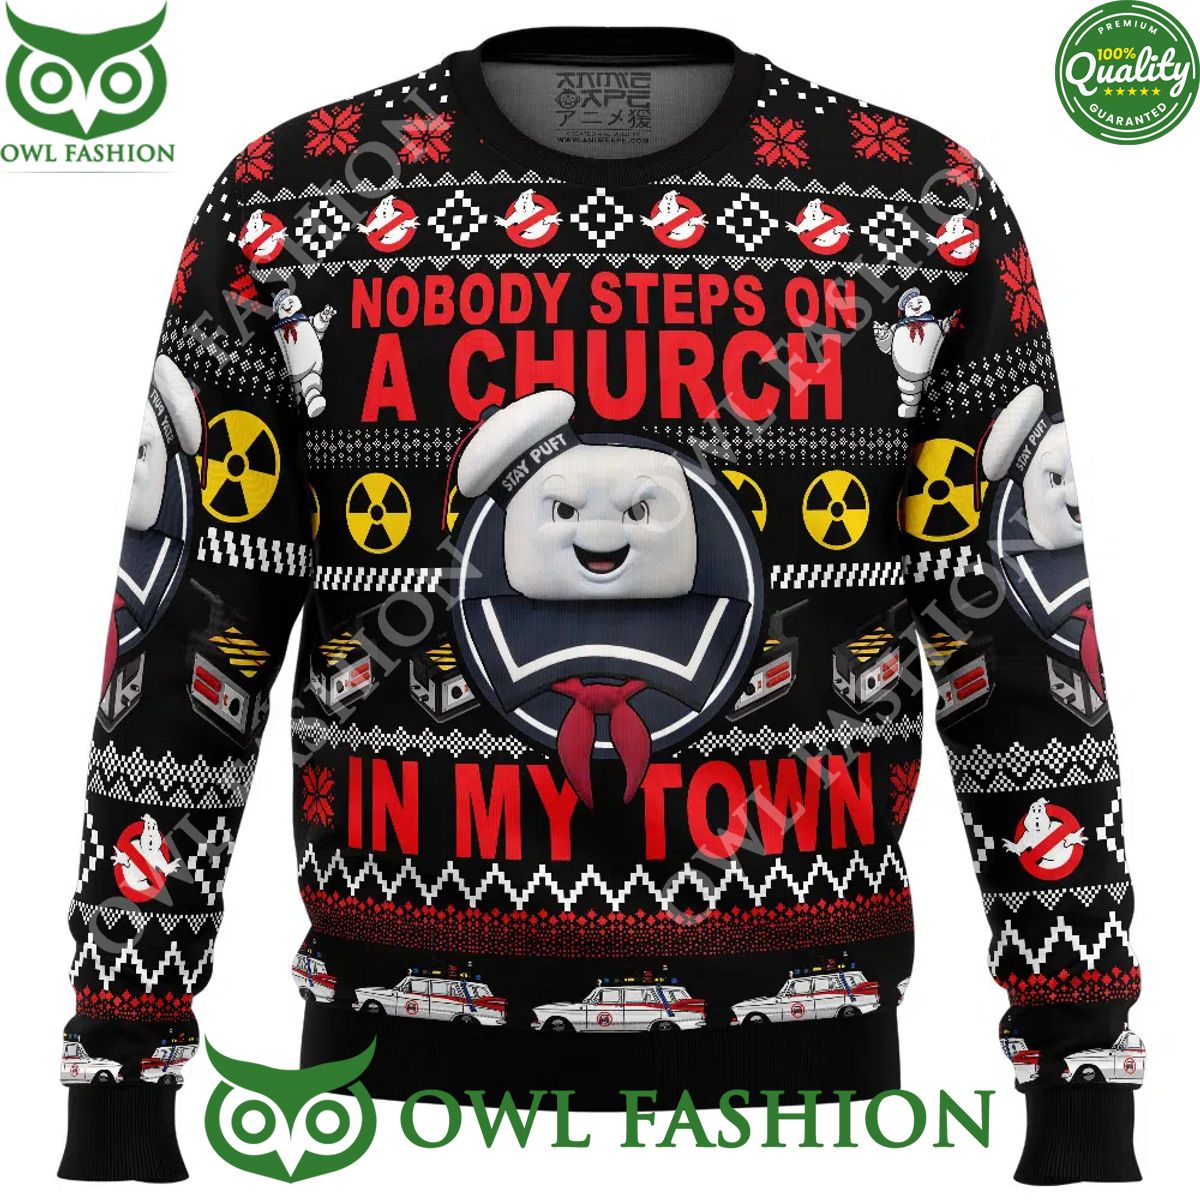 in my town ghost busters ugly christmas sweater jumper 1 xzhYY.jpg